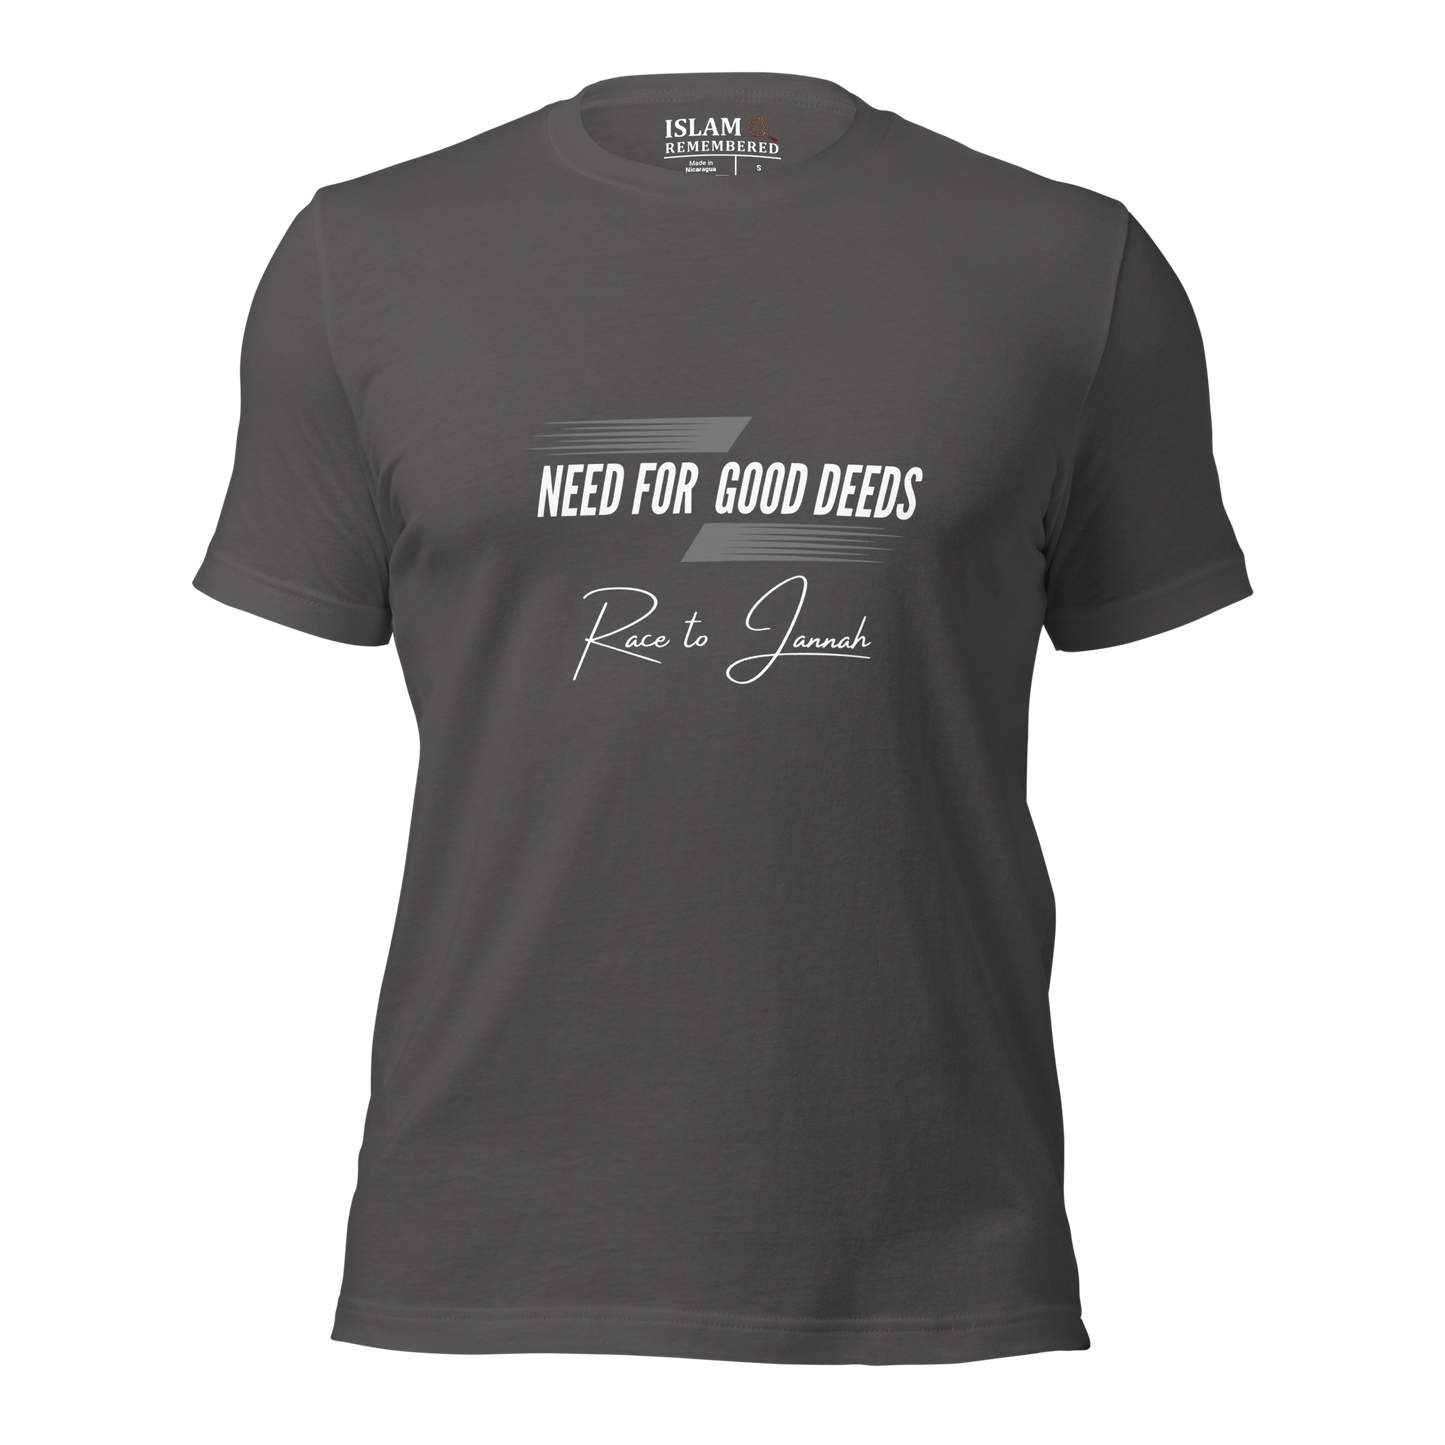 ADULT T-Shirt - NEED FOR GOOD DEEDS - White/Gray